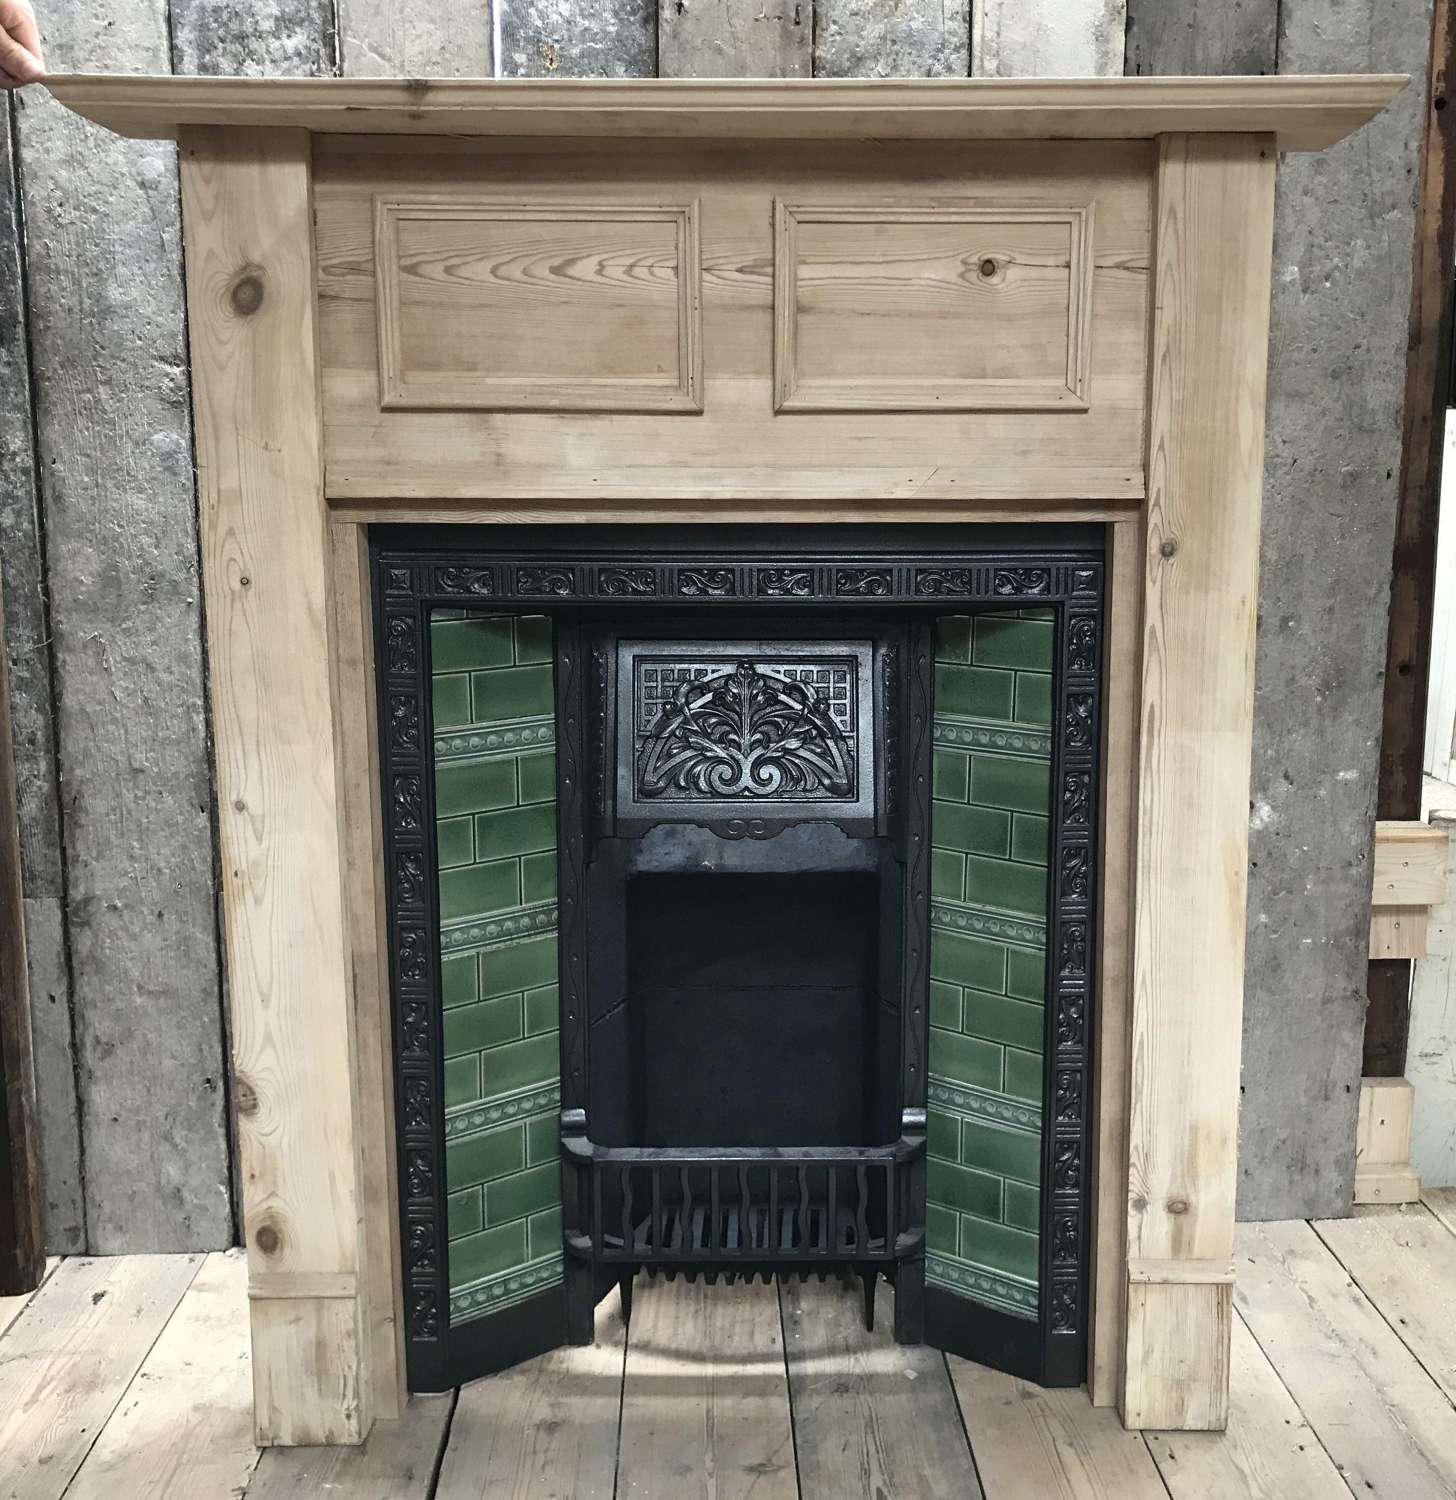 FC0085 A TILED EDWARDIAN FIRE INSERT WITH RECLAIMED PINE FIRE SURROUND